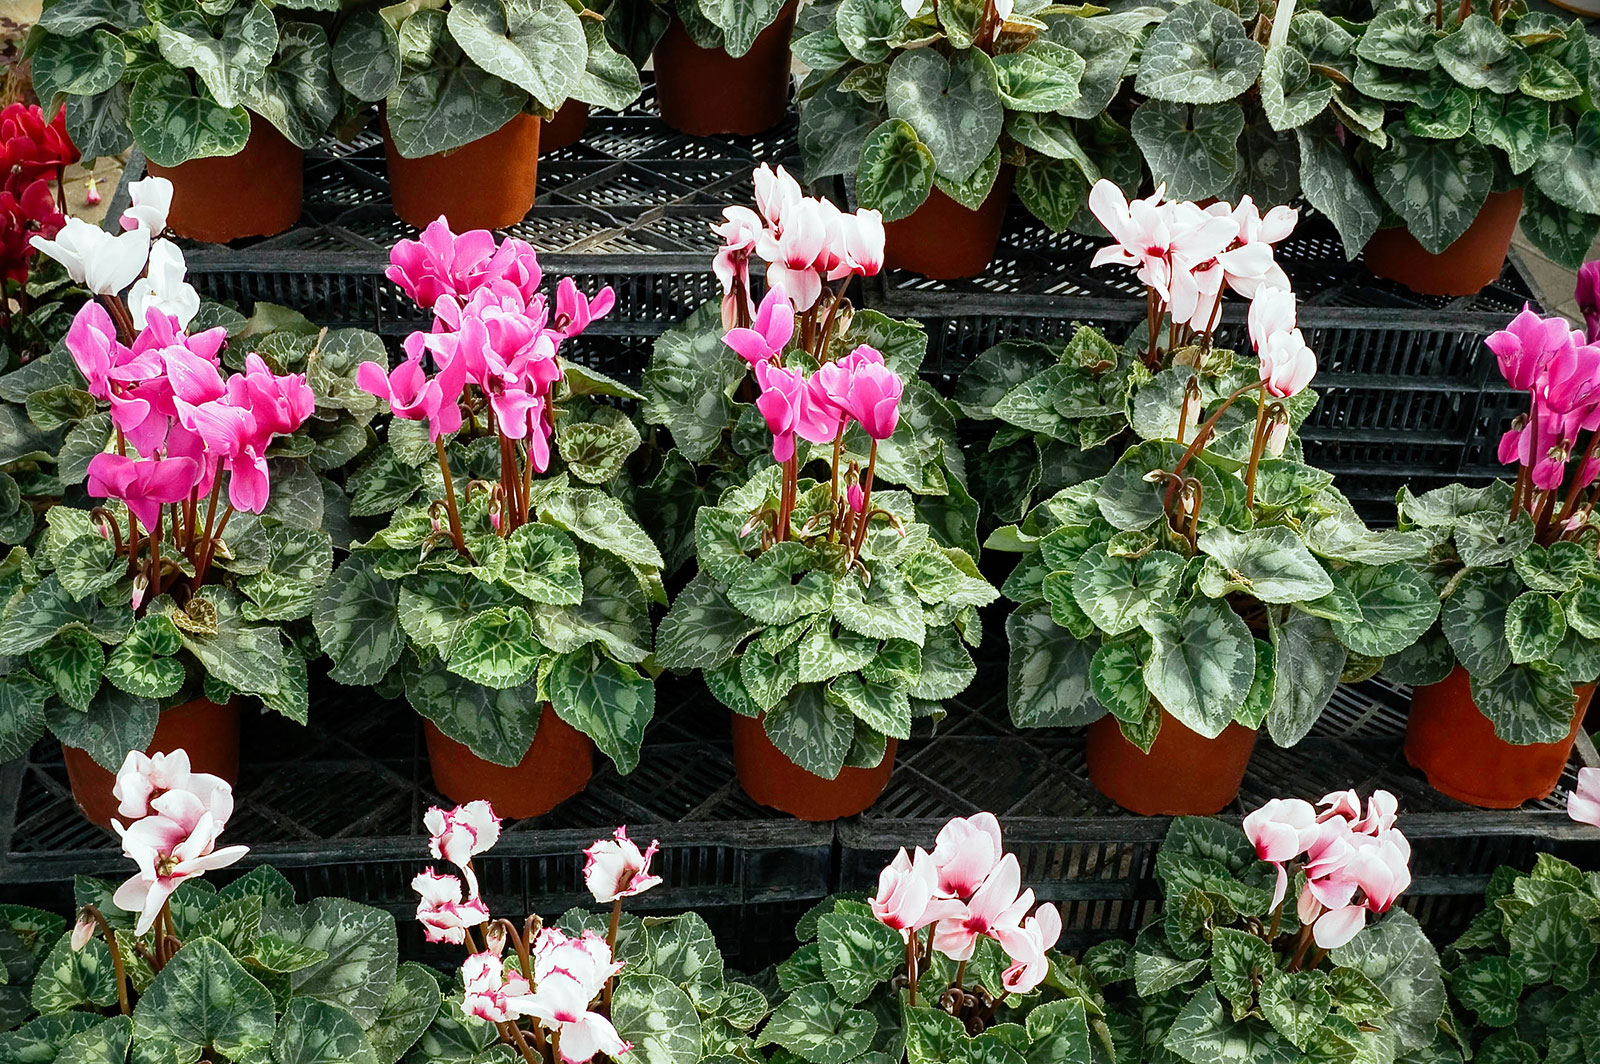 A variety of potted pink and white cyclamen for sale in a plant nursery